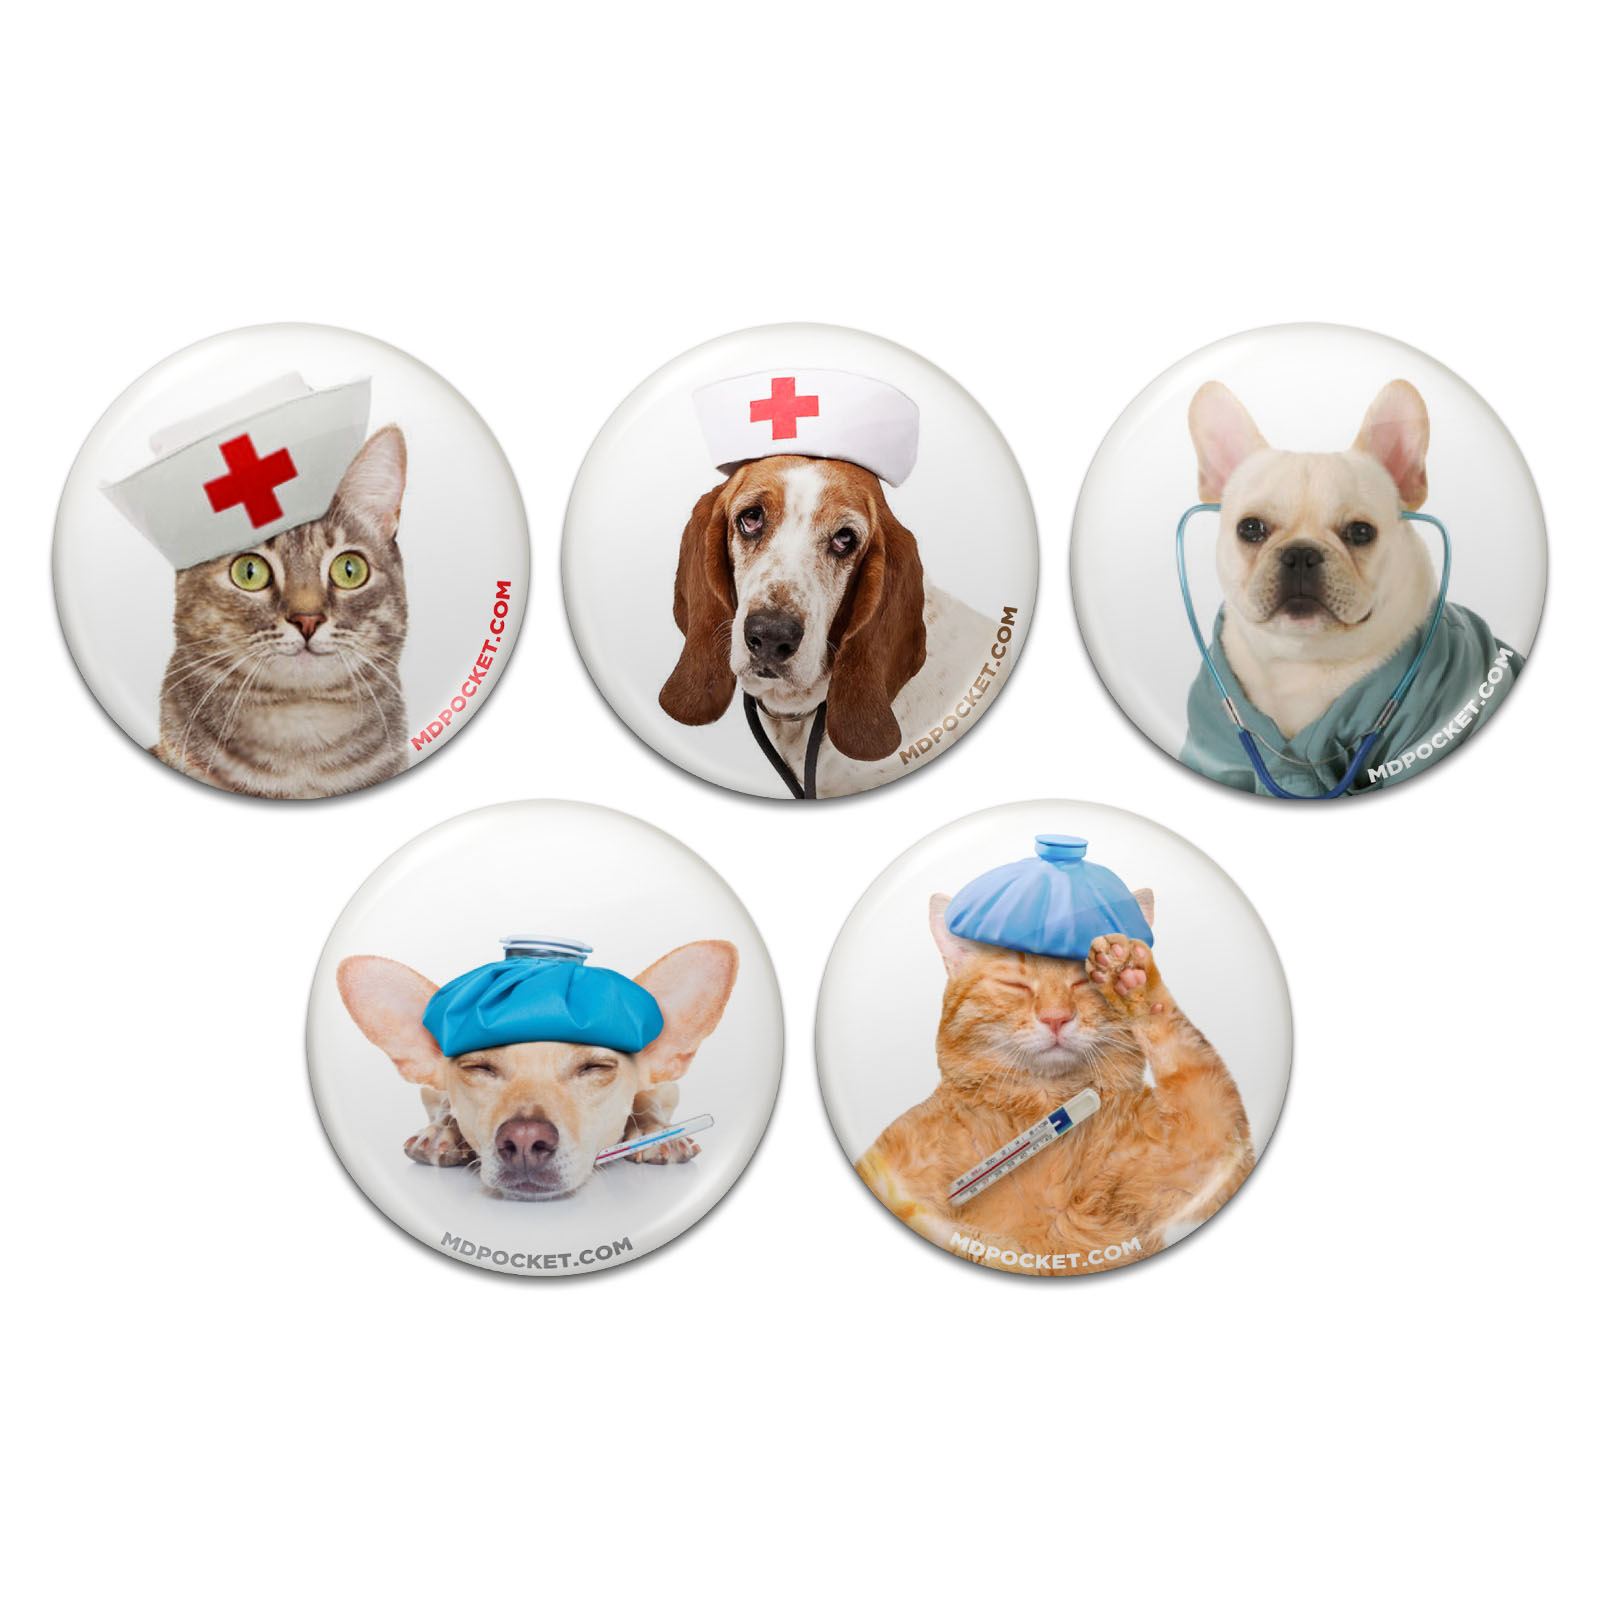 Dog Button Set of 5 Different Images *Special Price*  FREE US SHIPPING 